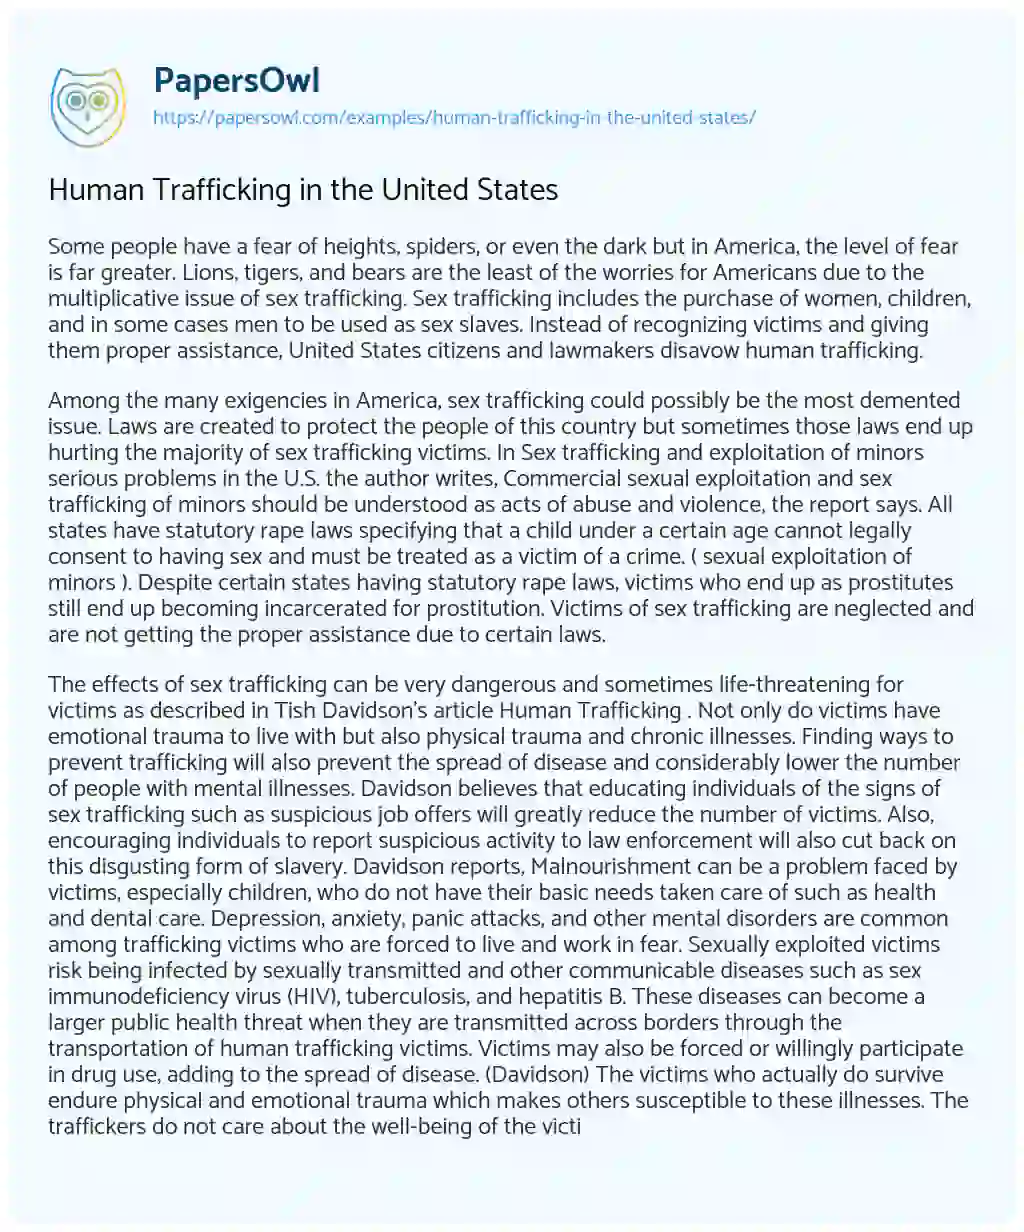 Essay on Human Trafficking in the United States